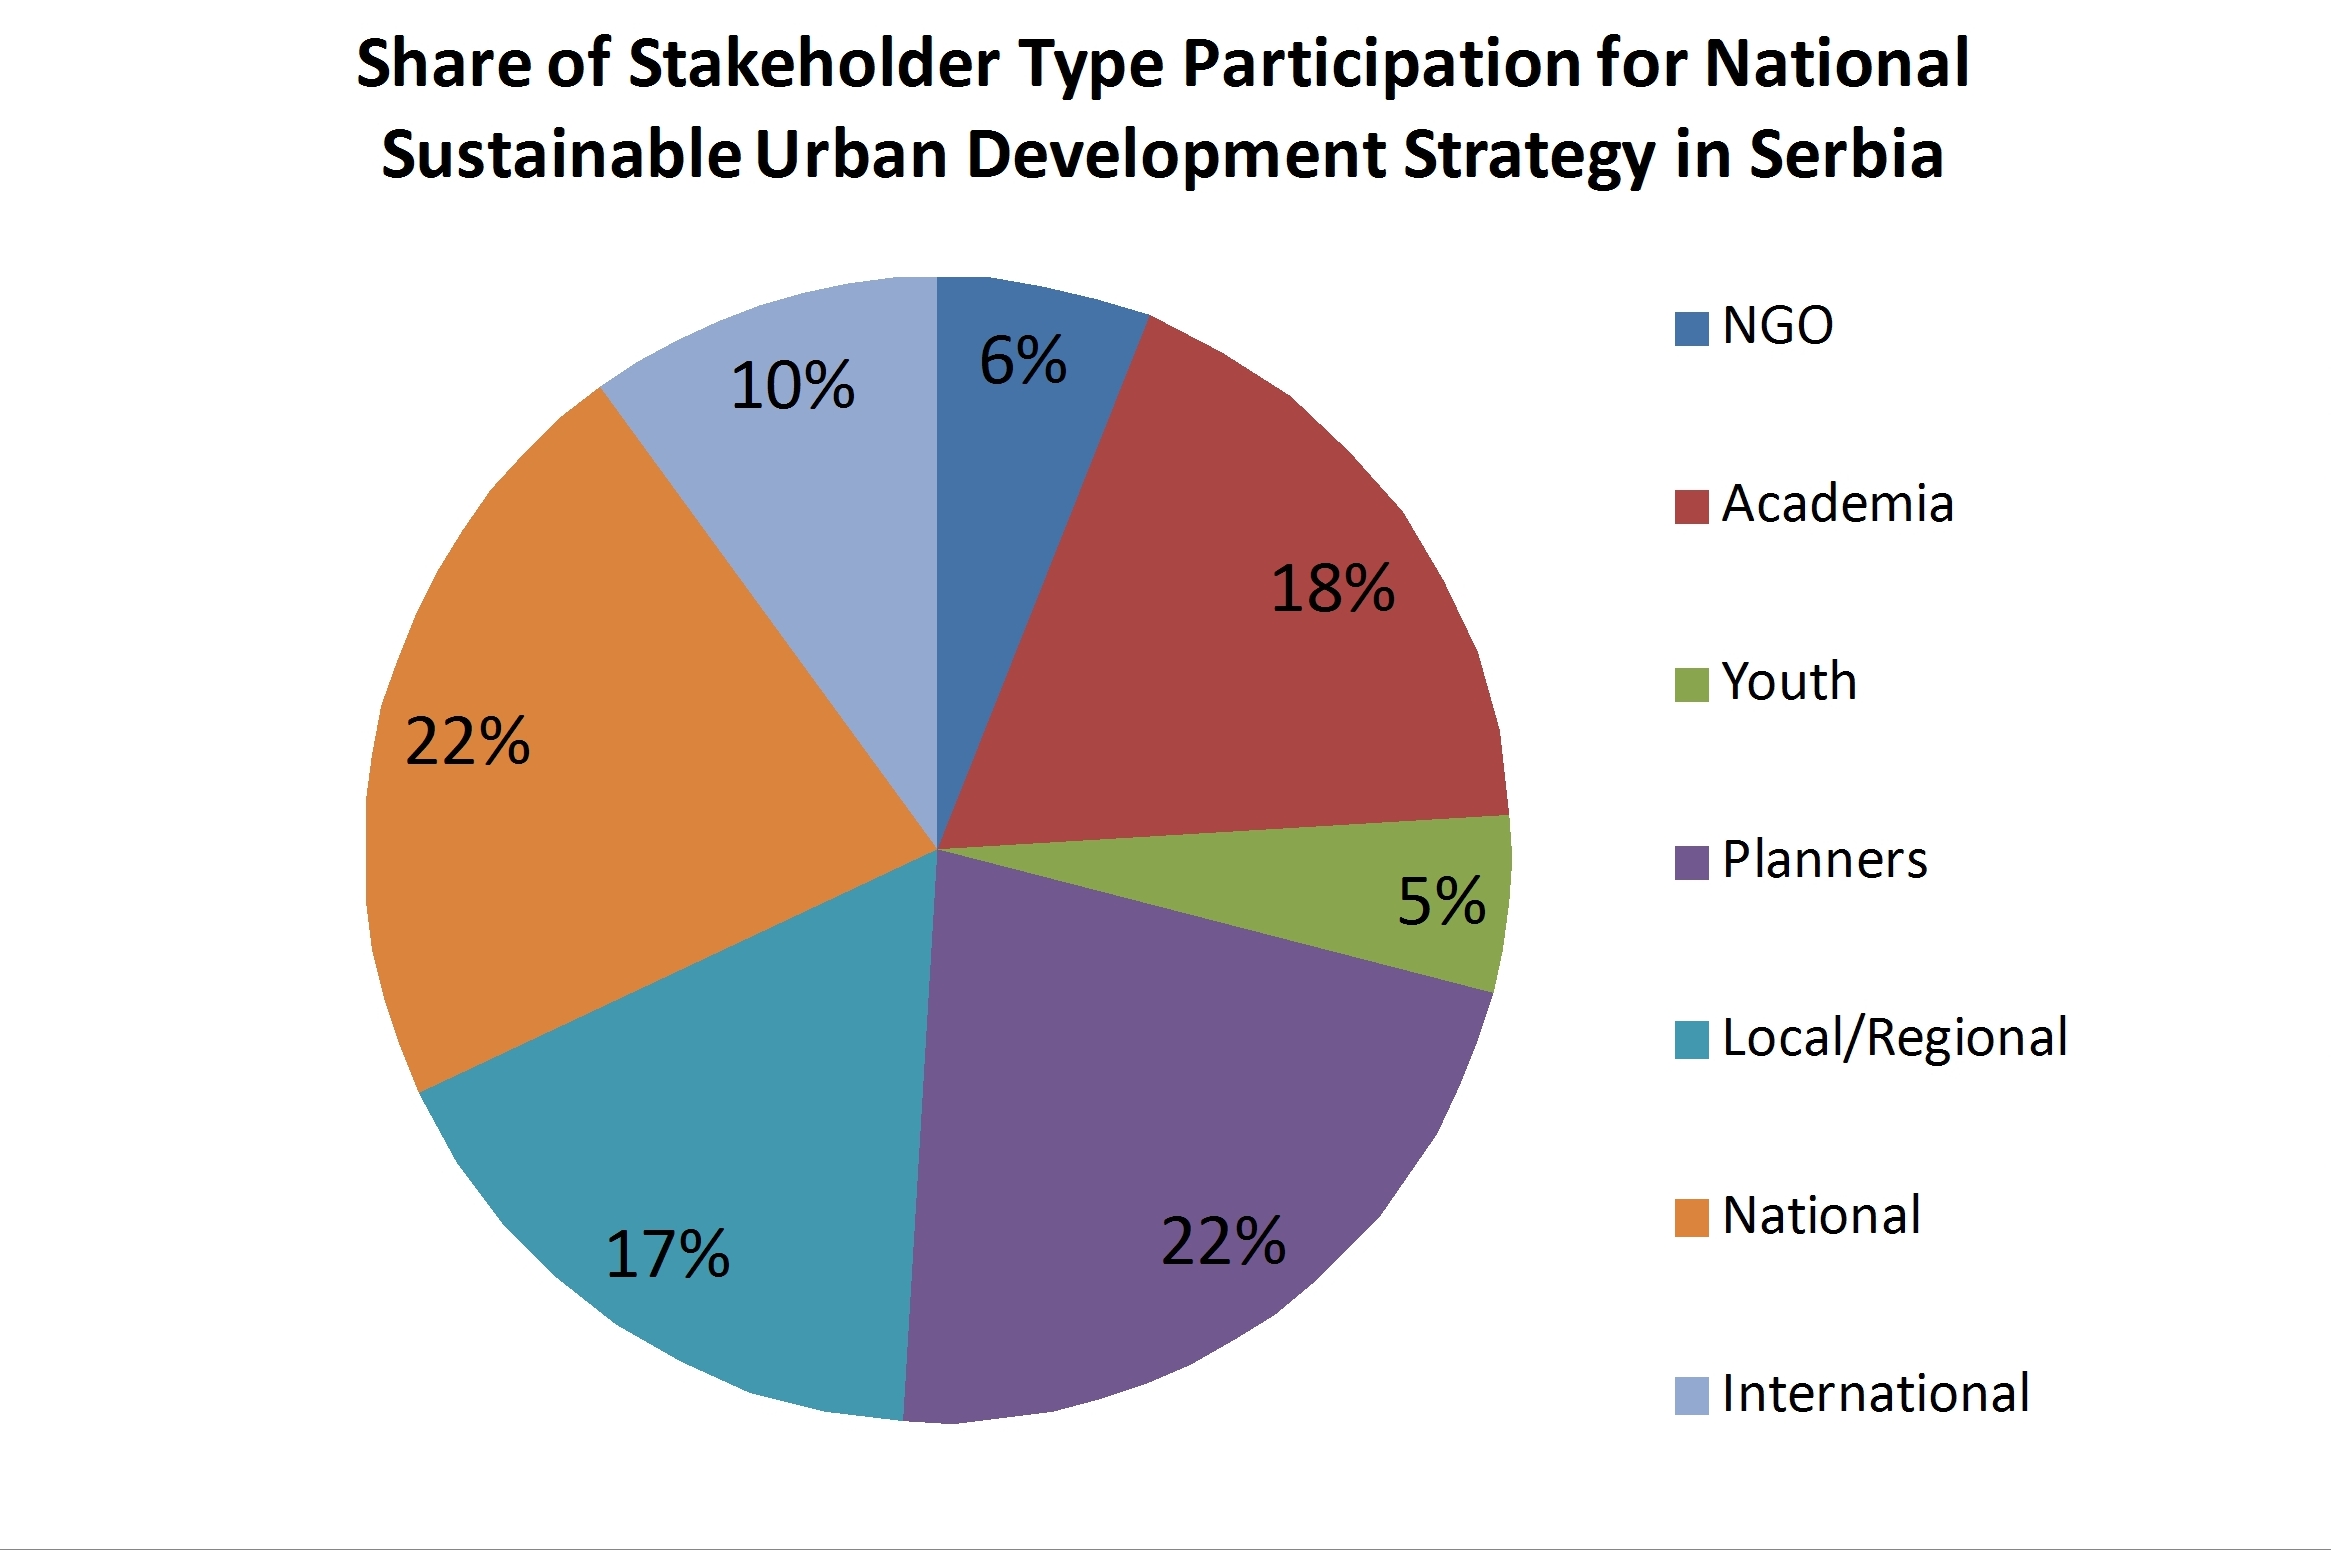 Pie chanrt showing share of stakeholder type particpation